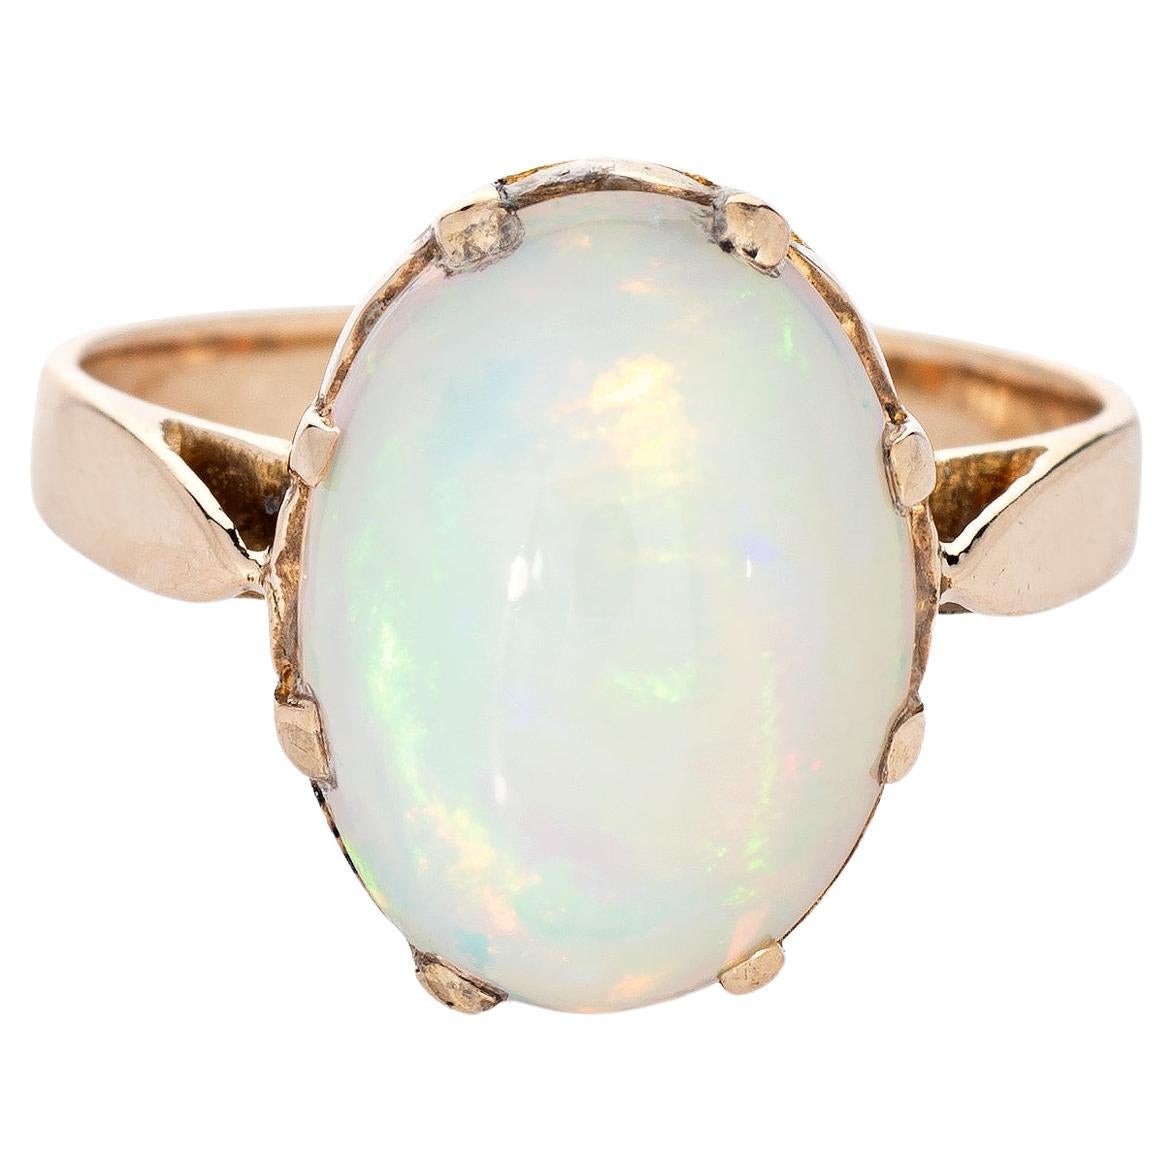 5.65ct Ethiopian Opal Ring Vintage 14k Yellow Gold Sz 6.5 Cocktail Jewelry  